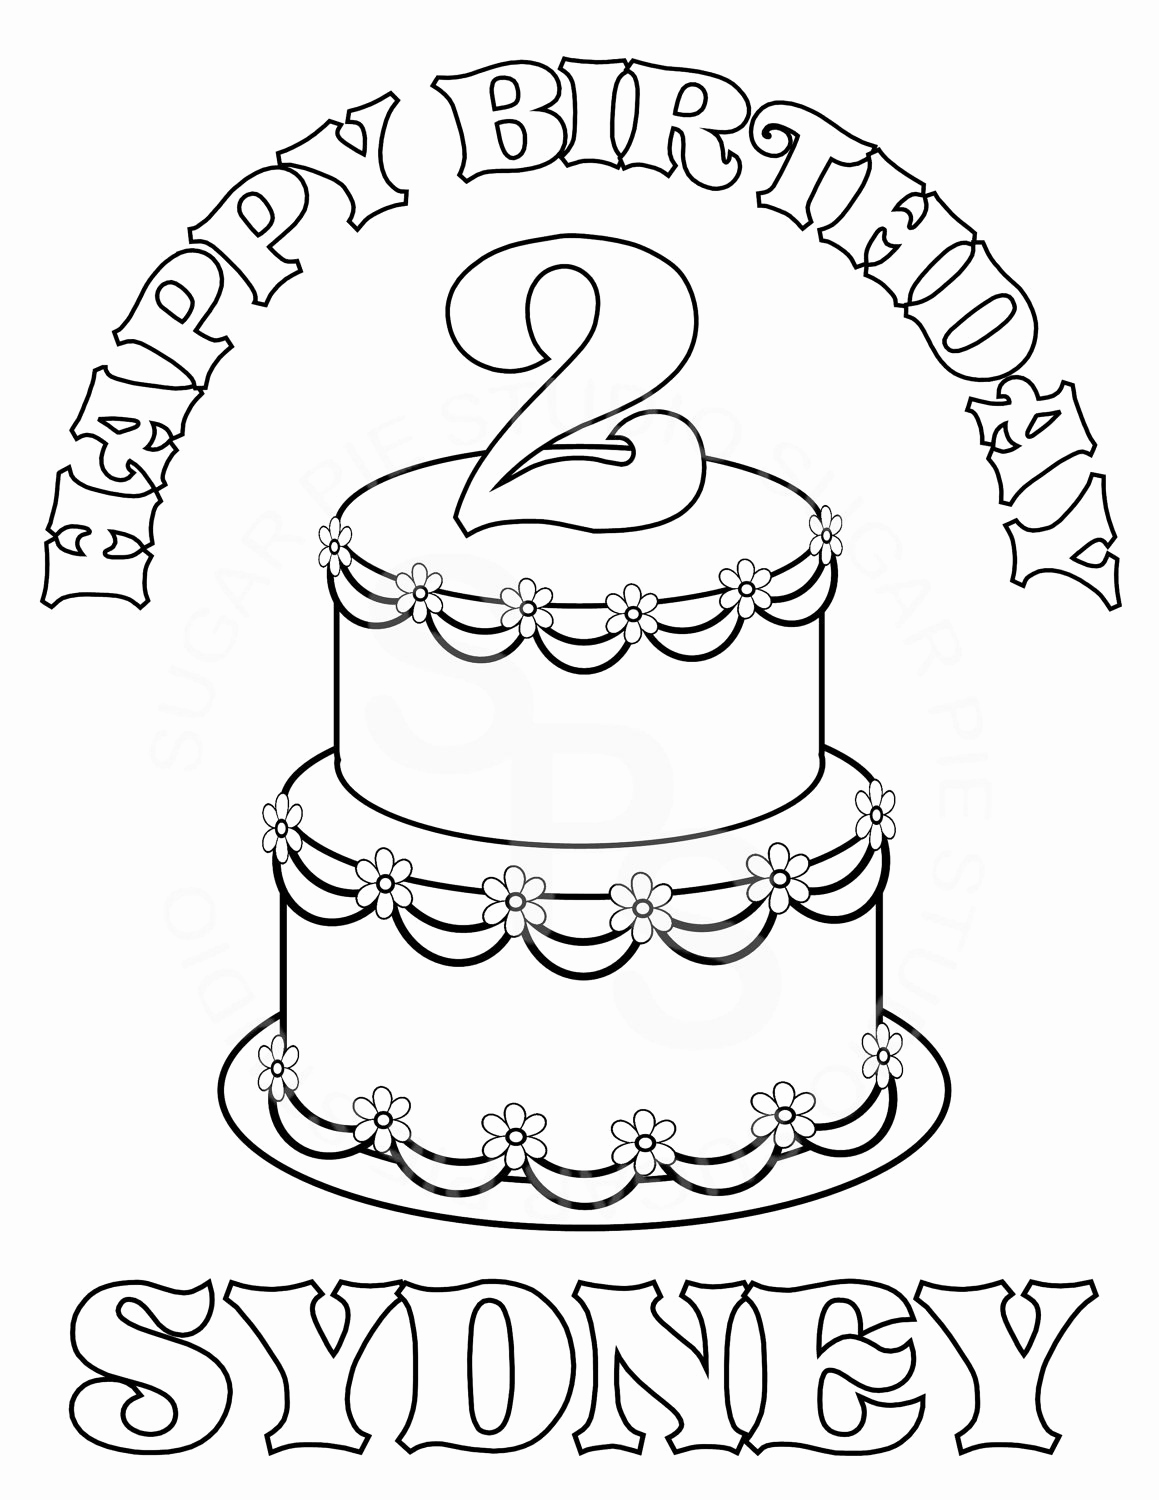 Happy Birthday Cupcake Coloring Pages at GetColorings.com ...